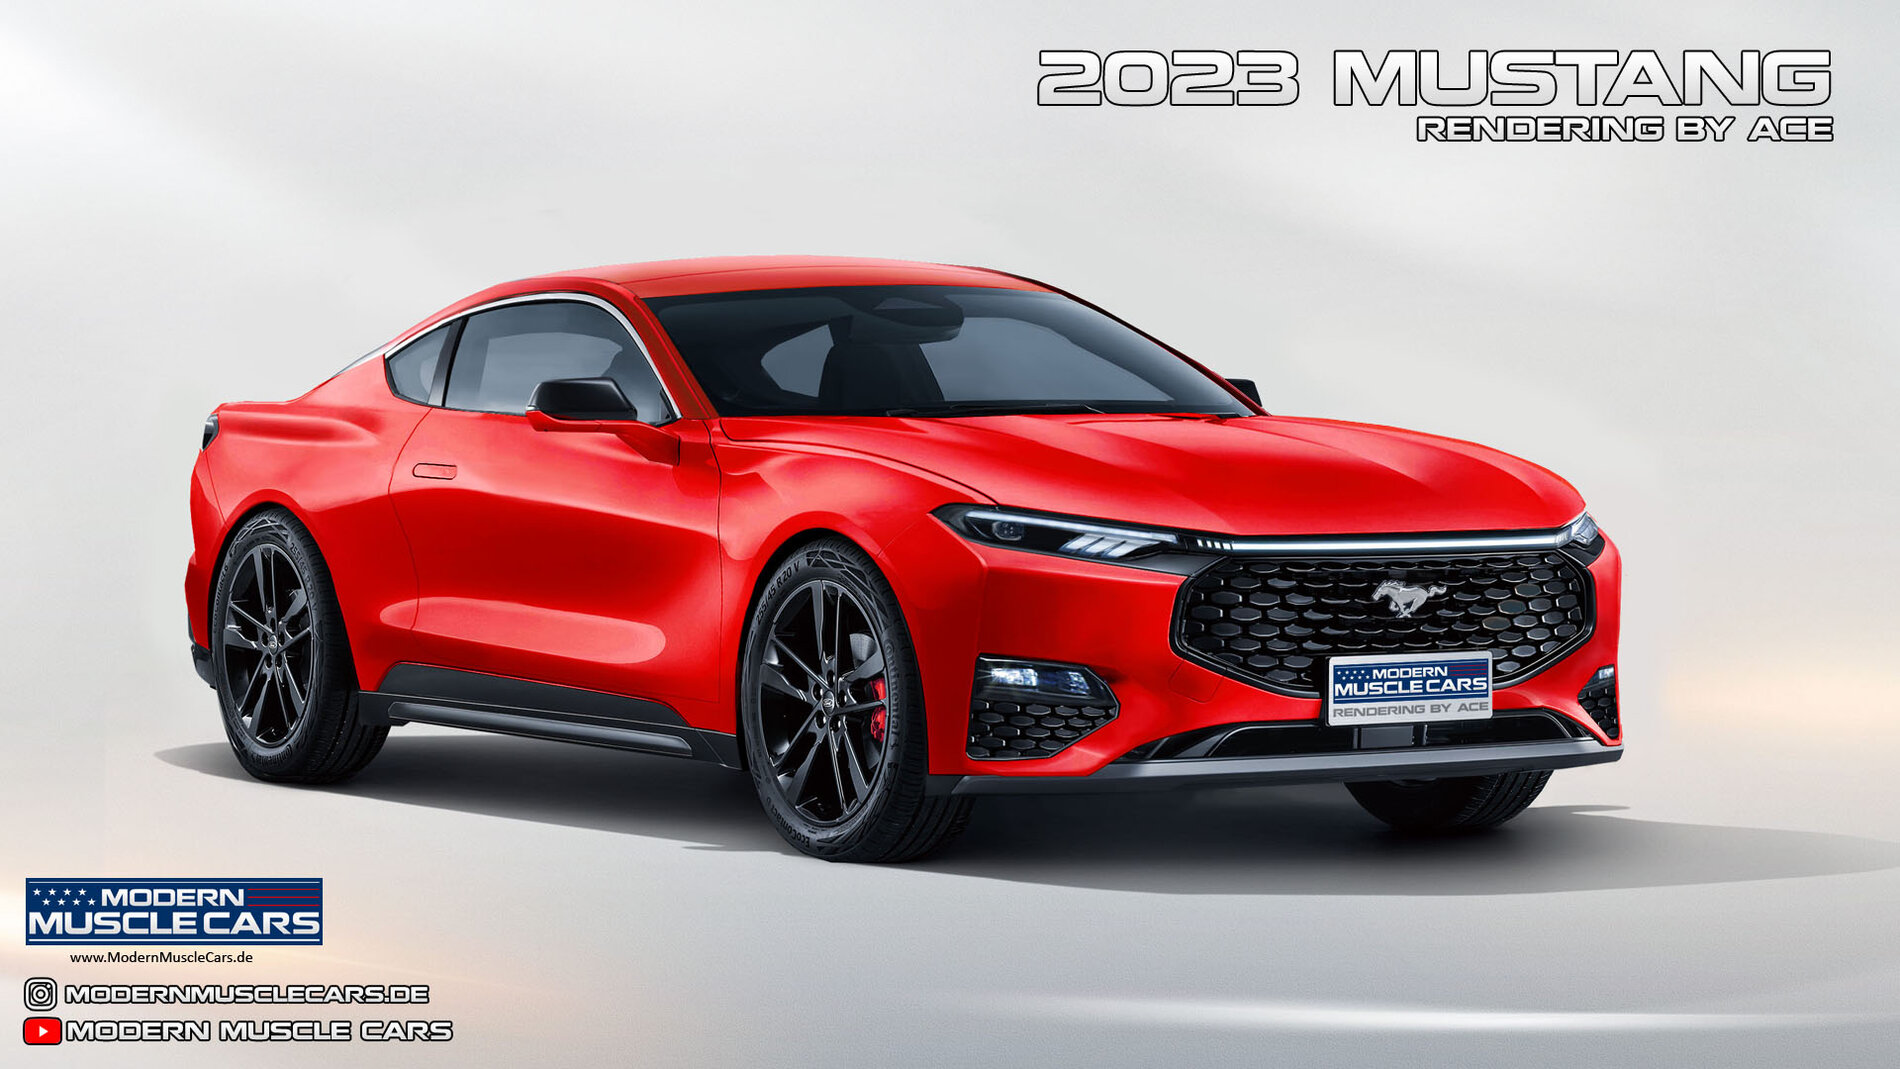 S650 Mustang Rendering: 2023 Mustang (based on Ford Evos) mustang7_red_modernmusclecars-